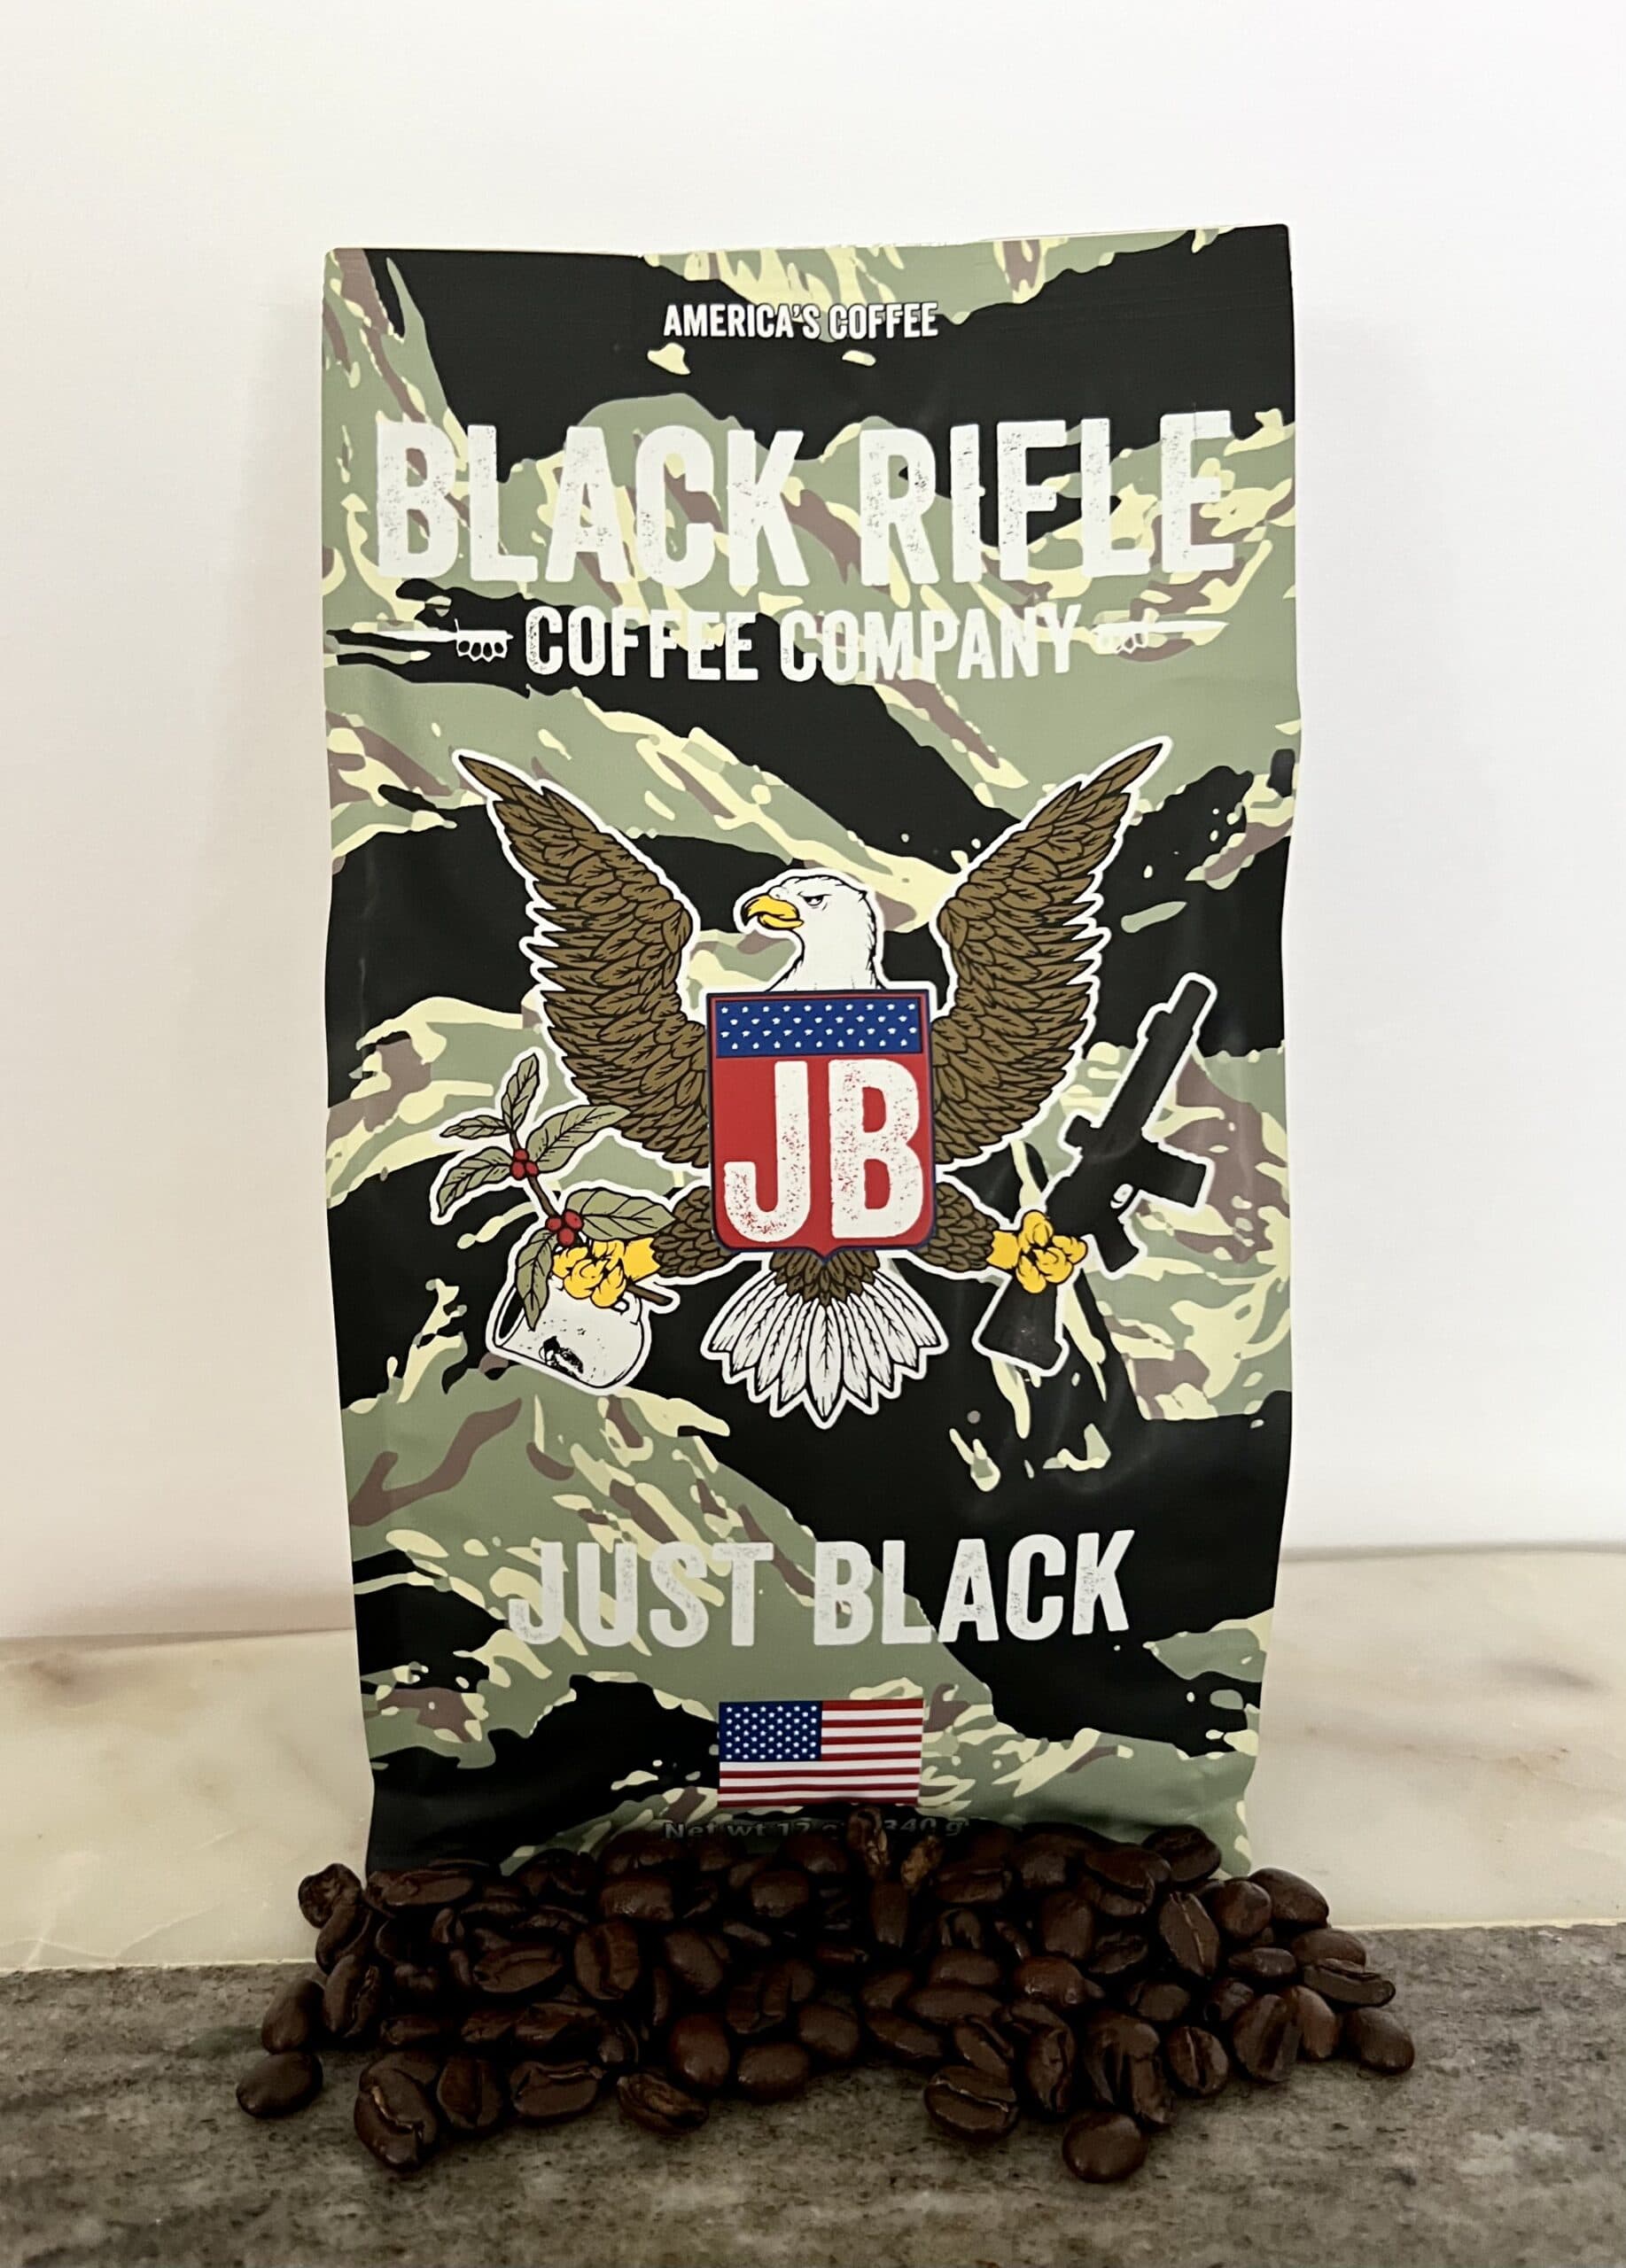 Just Black - Black Rifle Coffee next to the coffee beans 